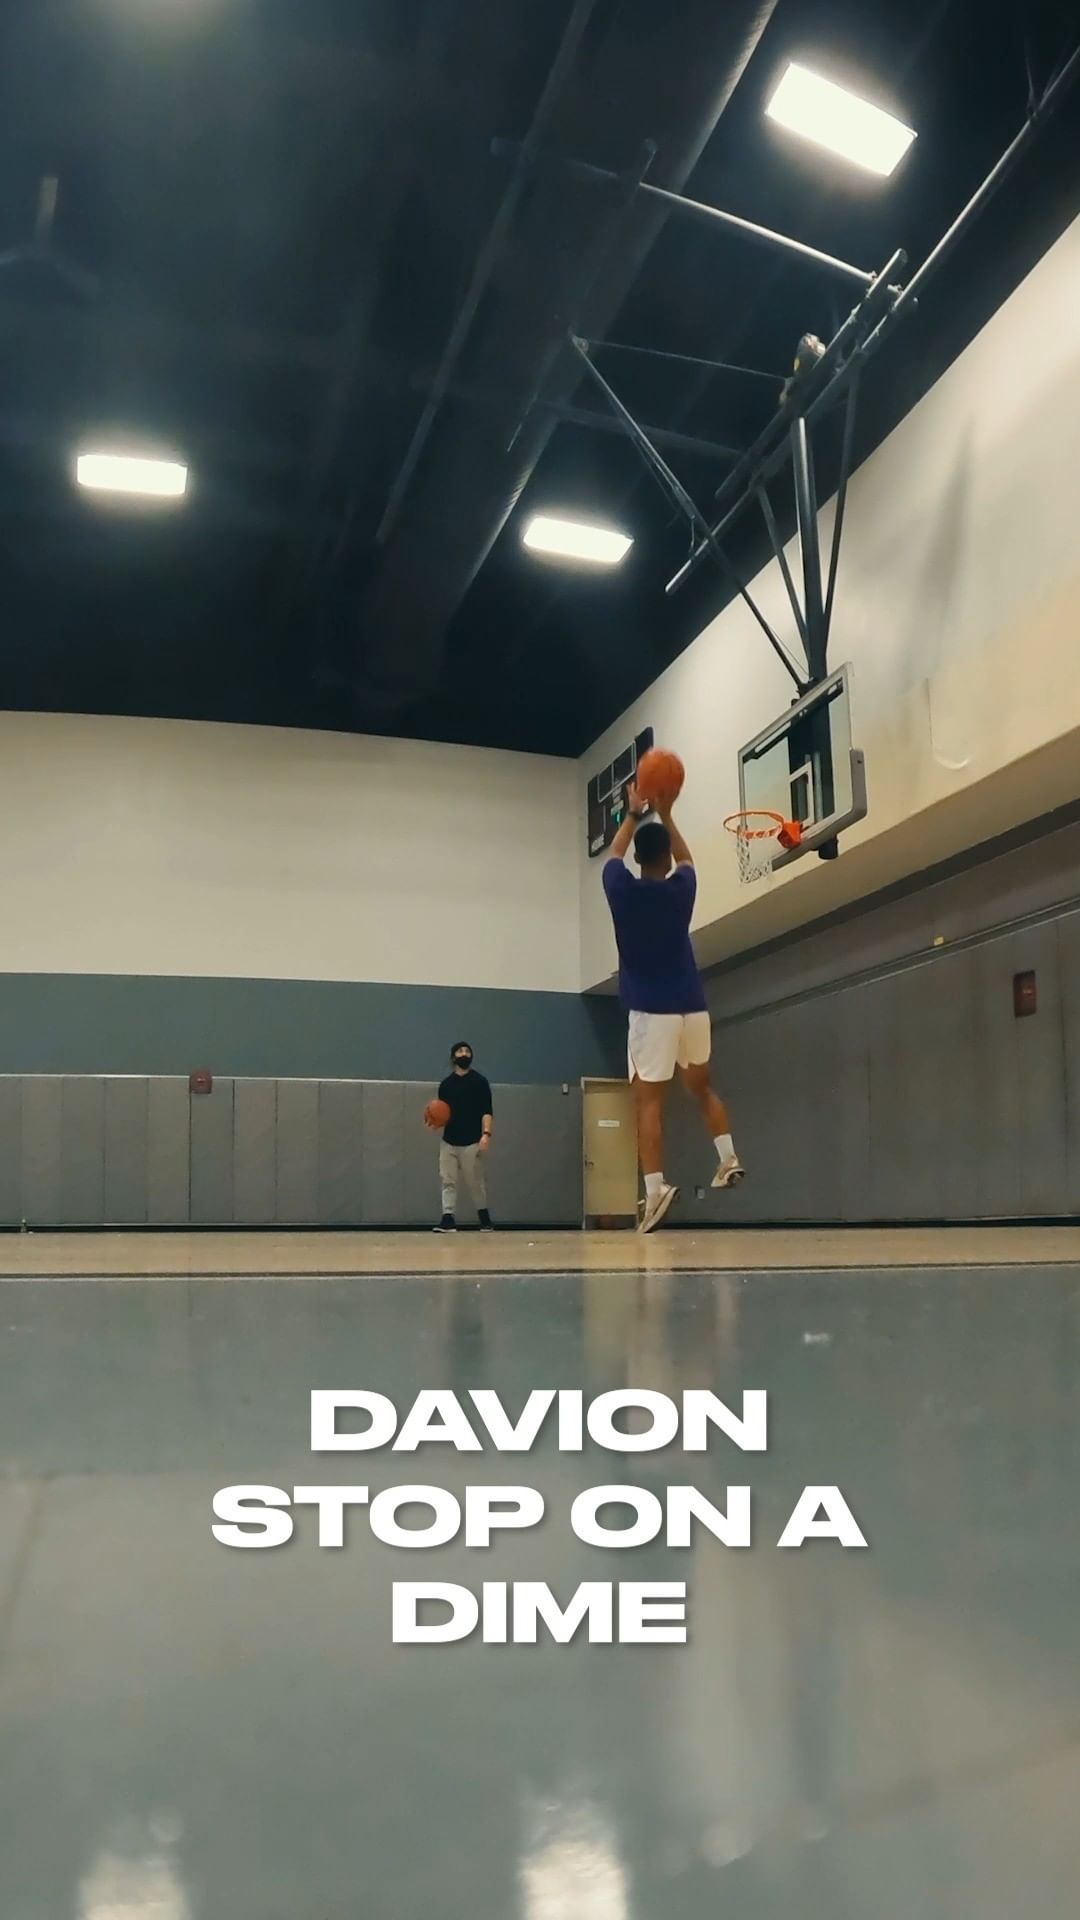 Jake is a shooter on and off the court  See what he gets into on day 4 of a 10 g...